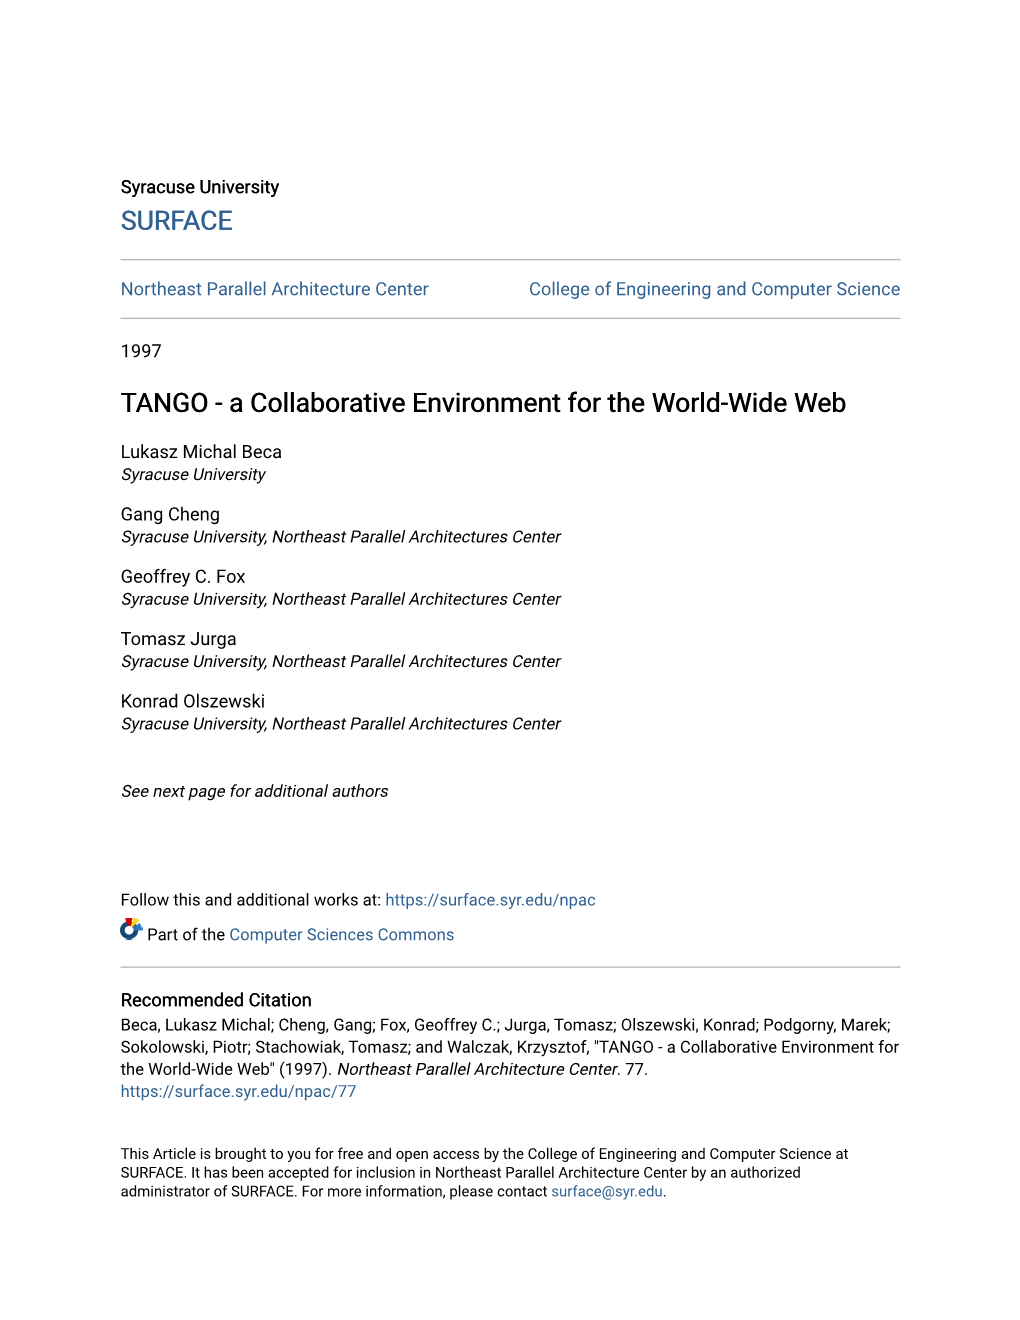 TANGO - a Collaborative Environment for the World-Wide Web